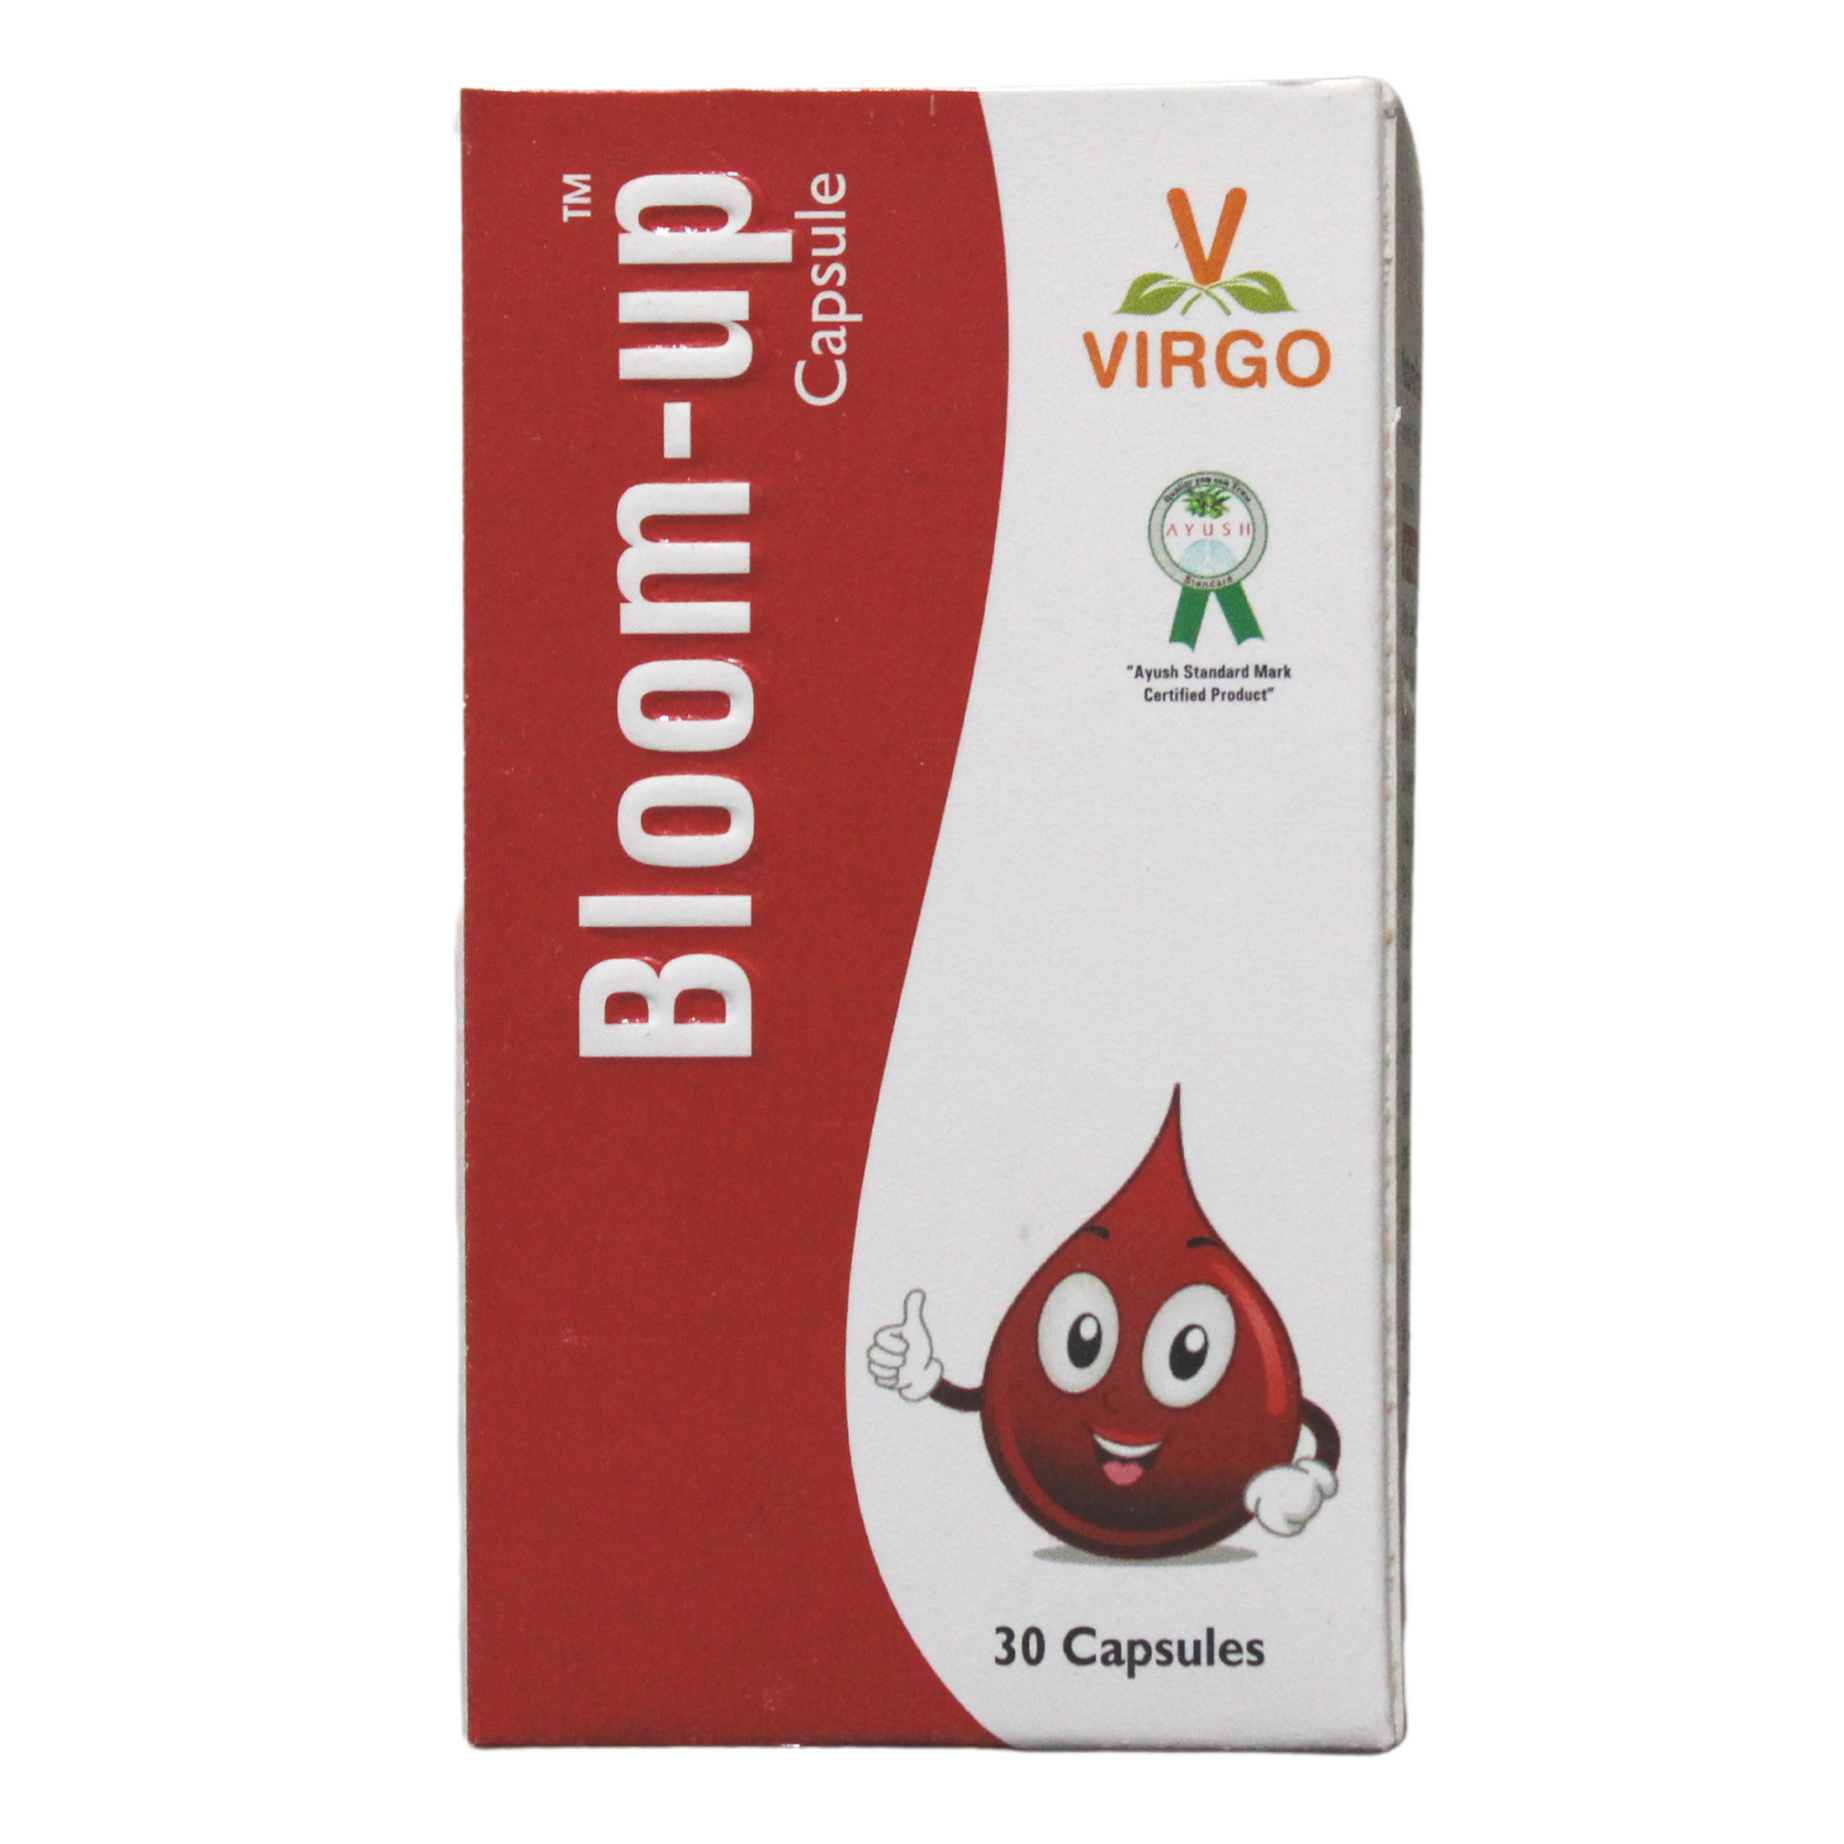 Shop Virgo Bloom-Up Capsules - 30 Capsules at price 119.00 from Virgo Online - Ayush Care